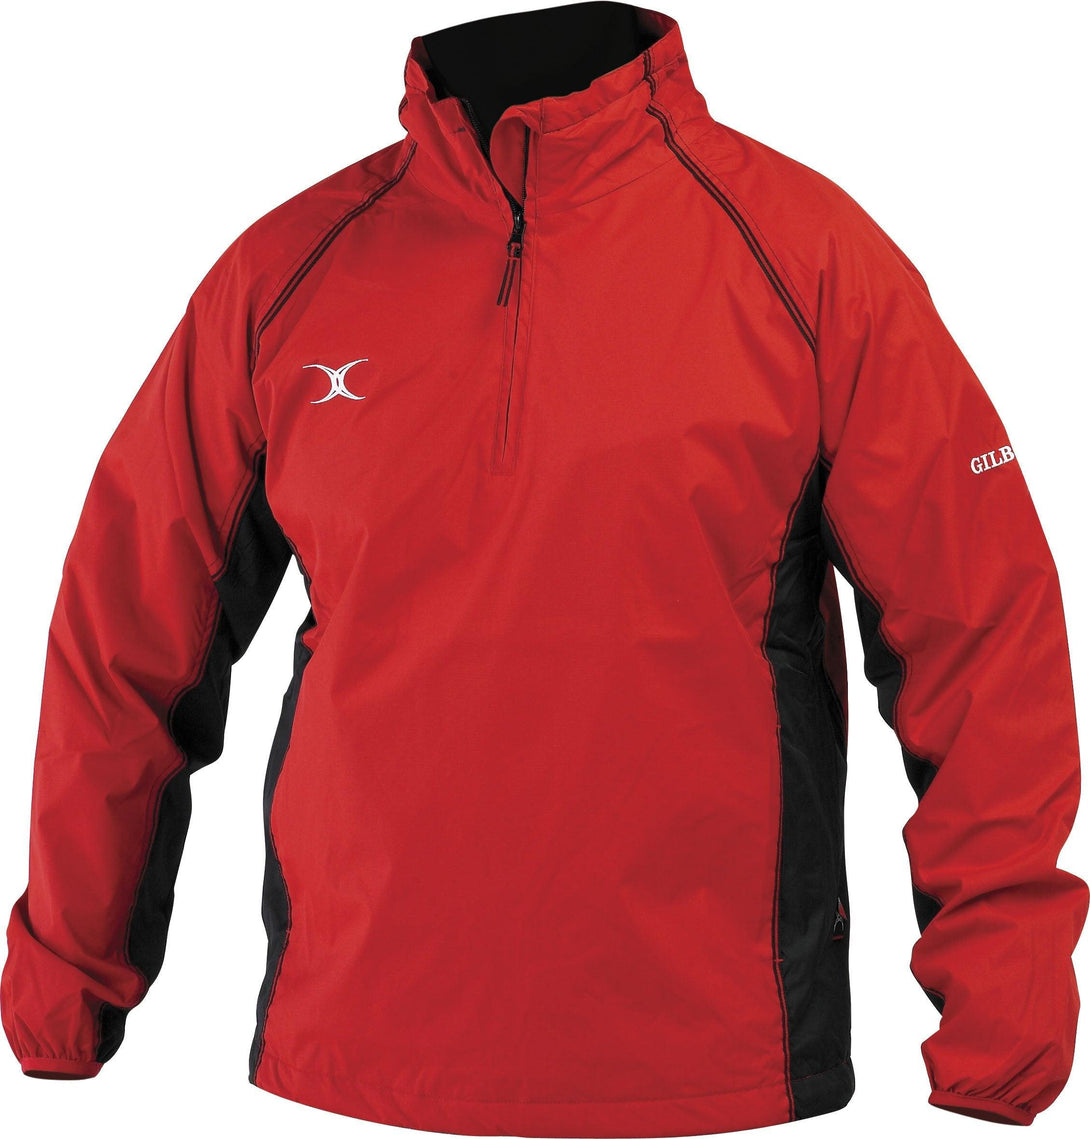 Rugby Heaven Gilbert Storm Jacket Kids - Red - www.rugby-heaven.co.uk